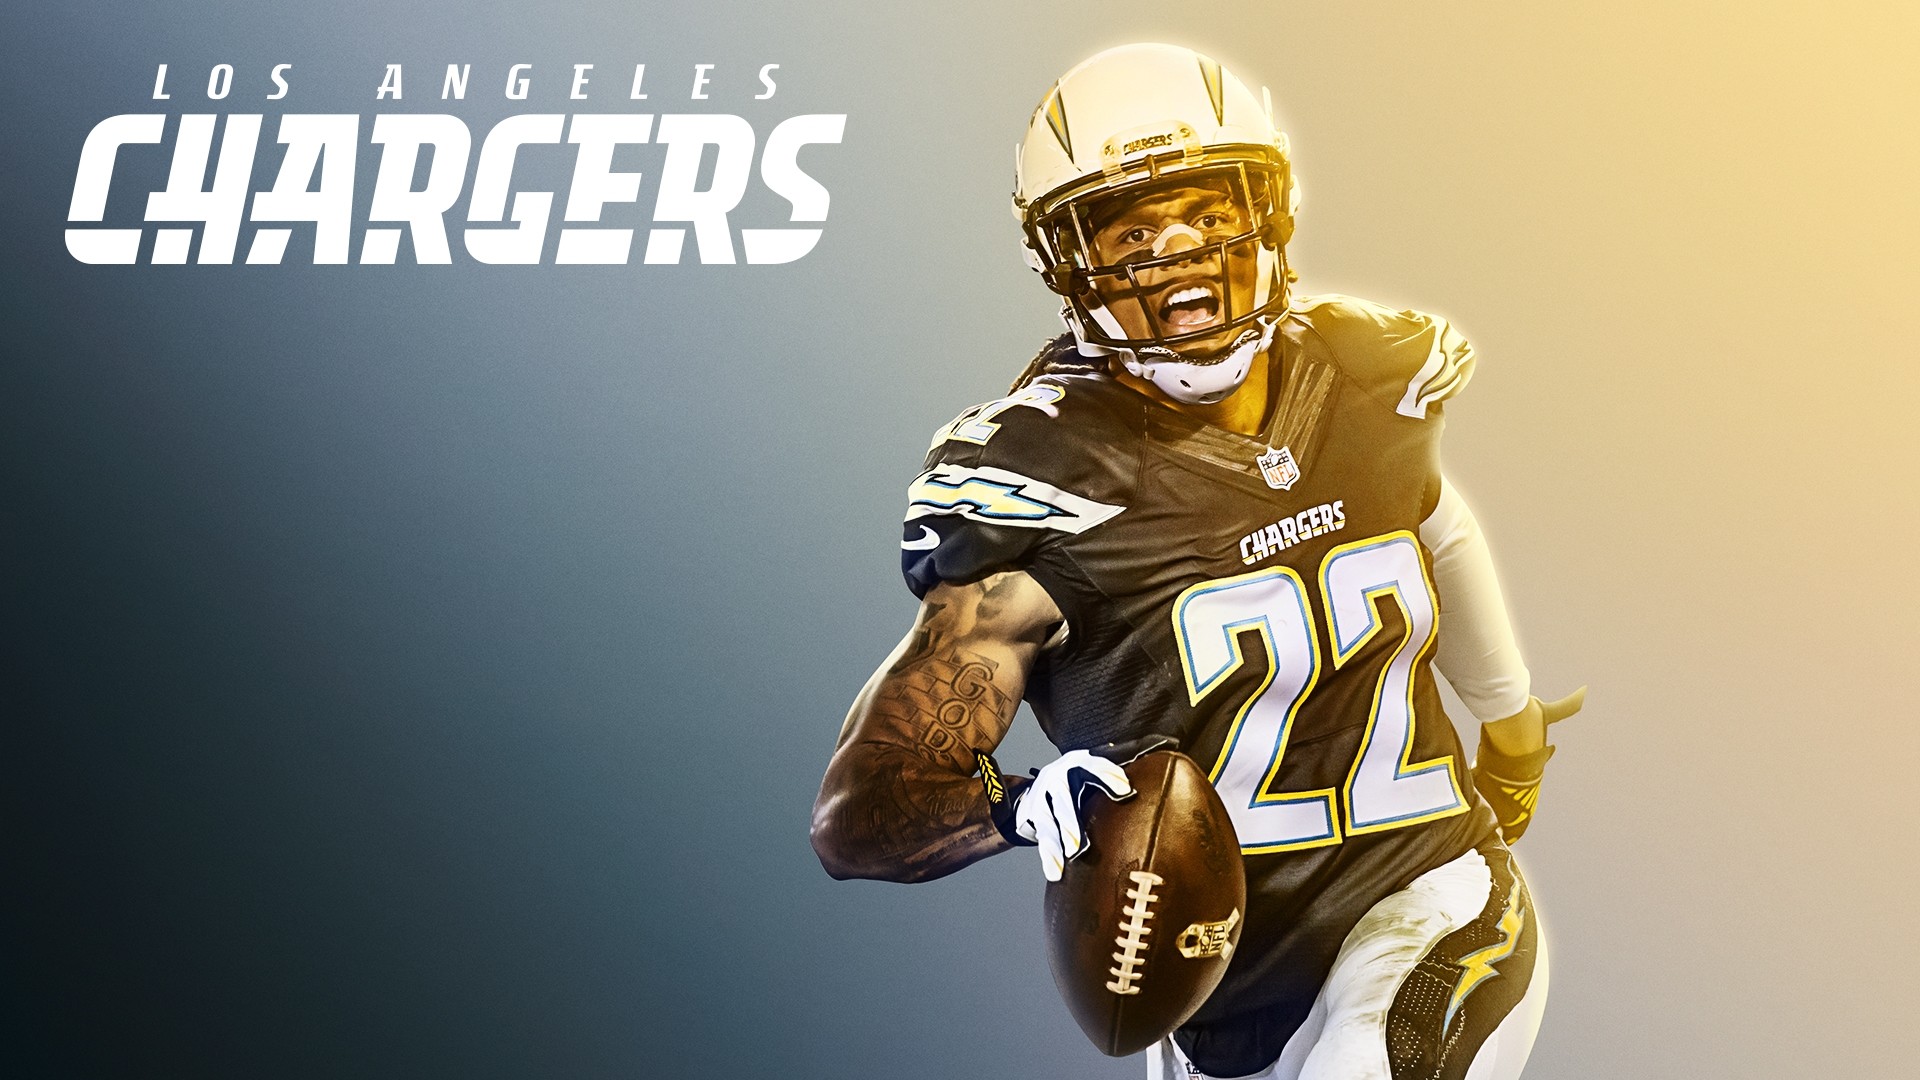 Chargers Wallpaper and Background